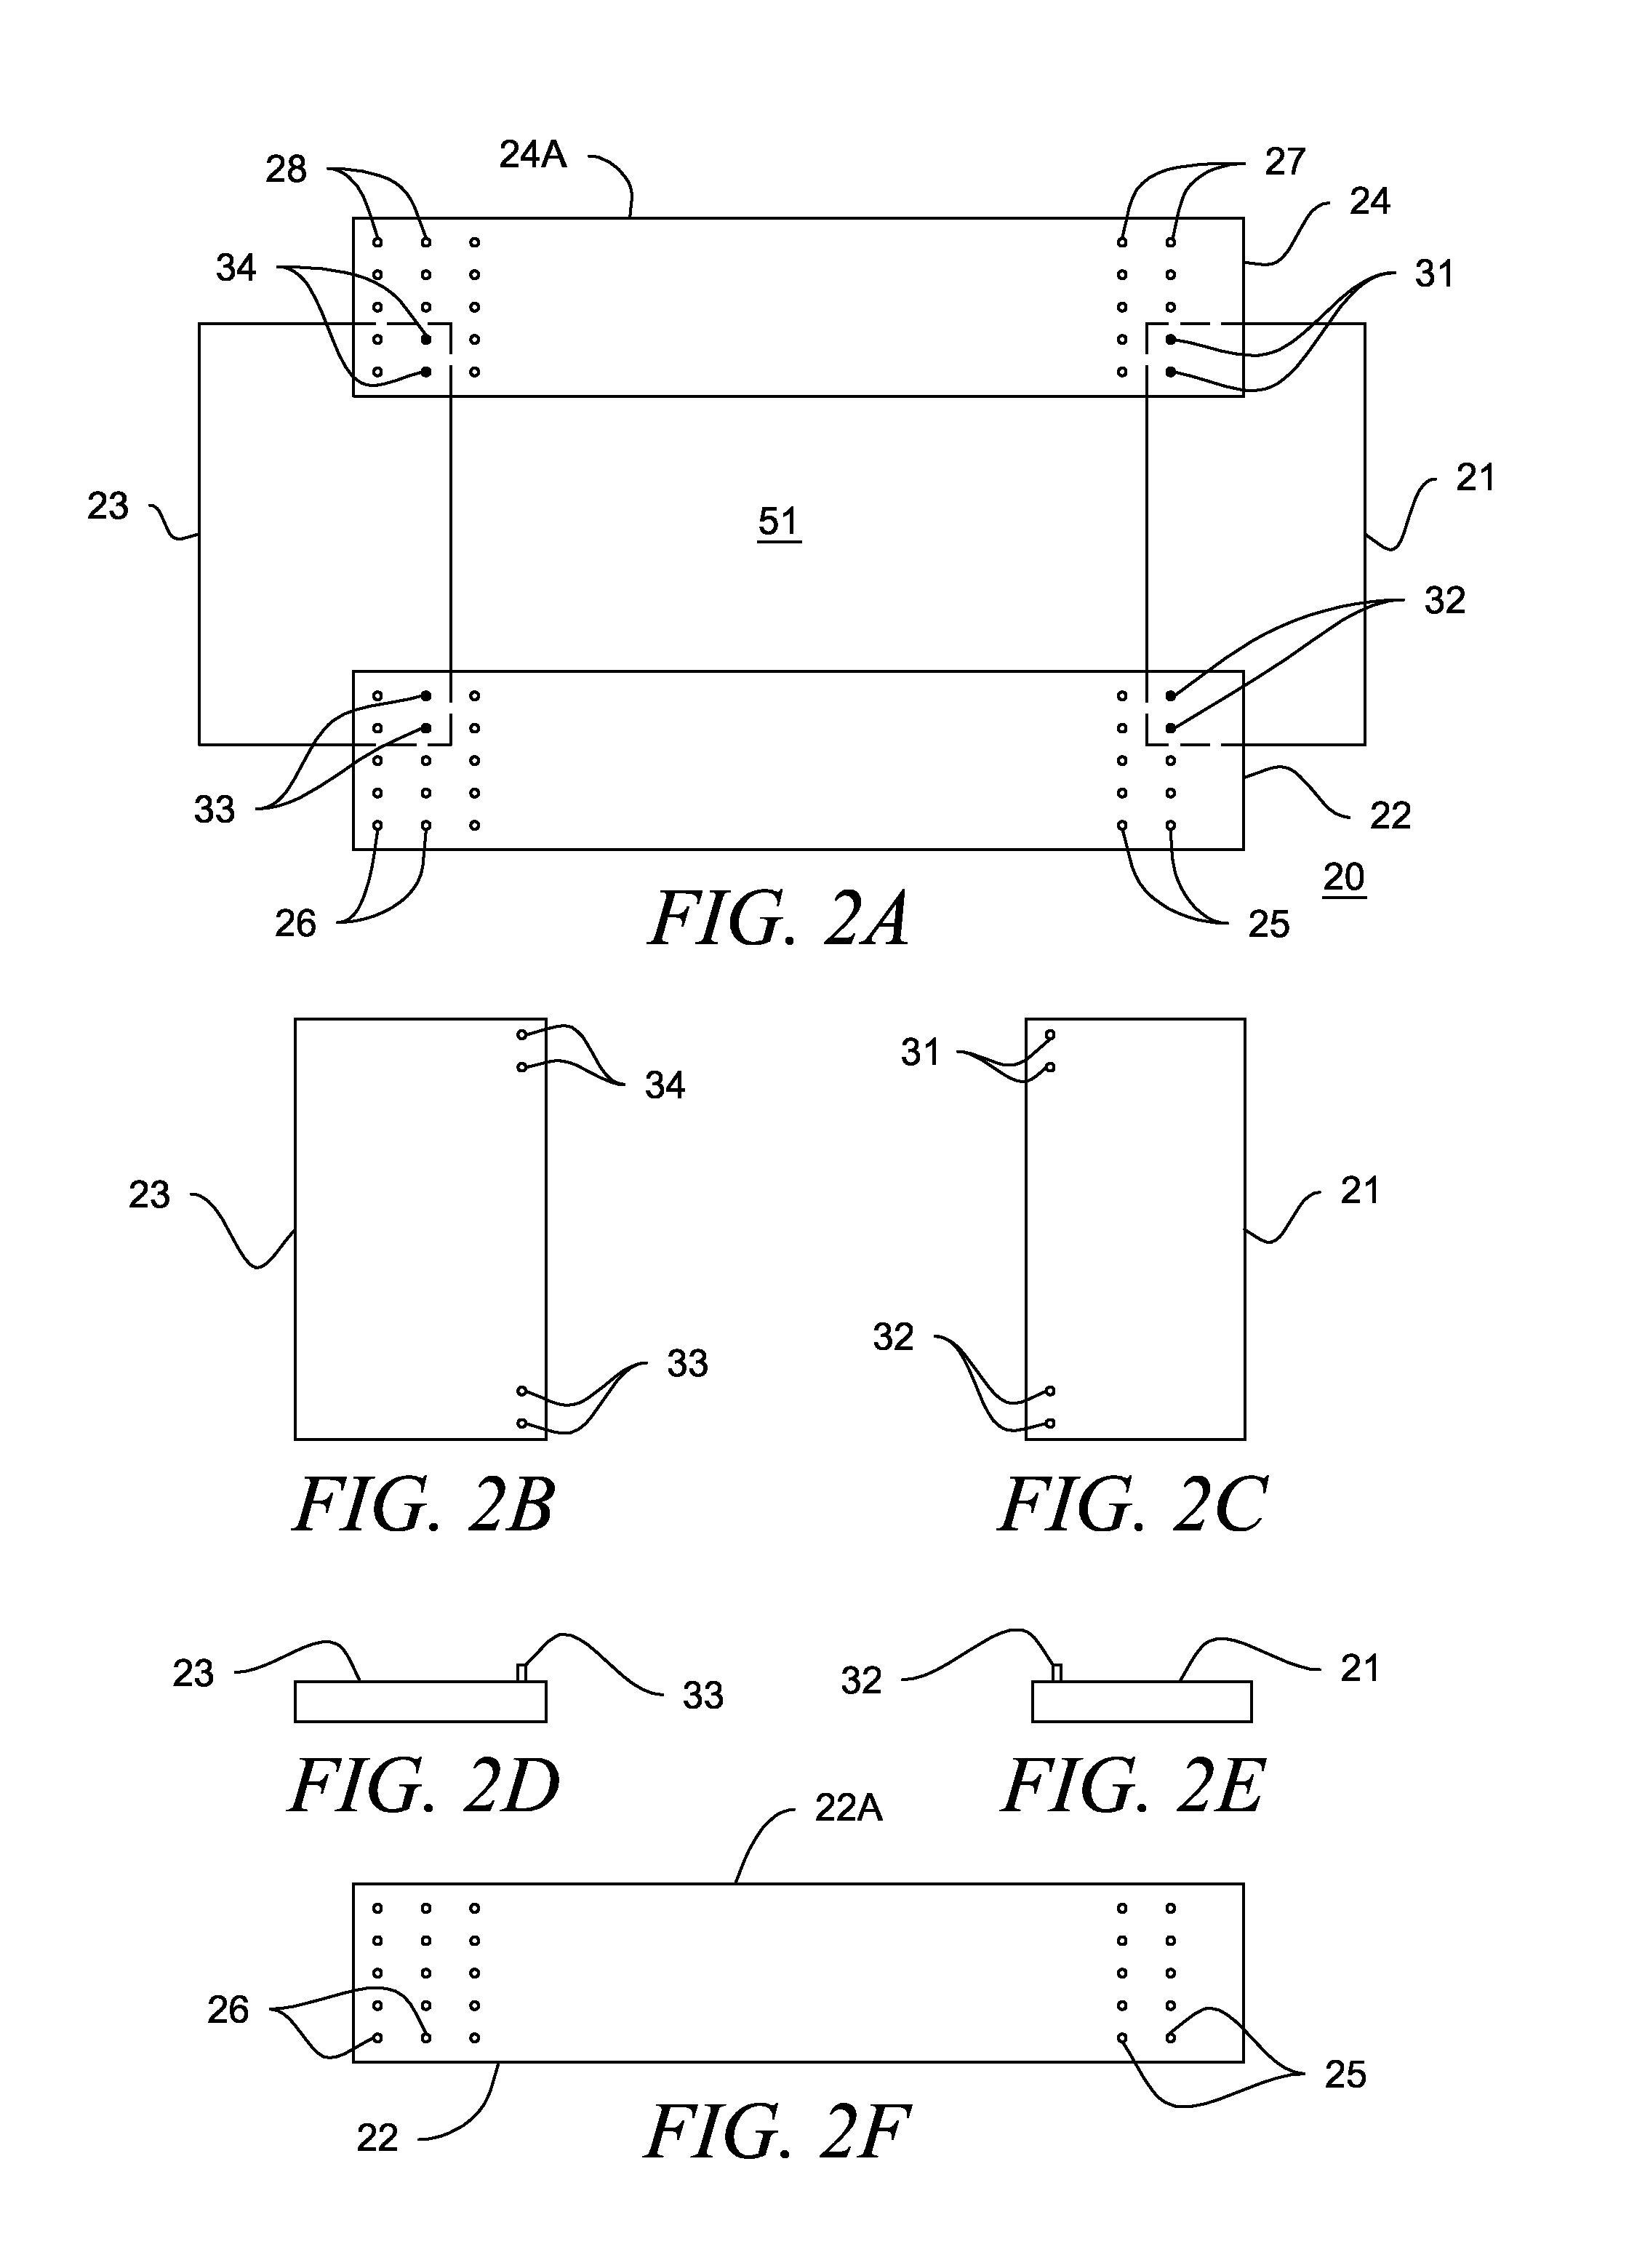 System and Method for the Selective Repair of Roofing Shingles